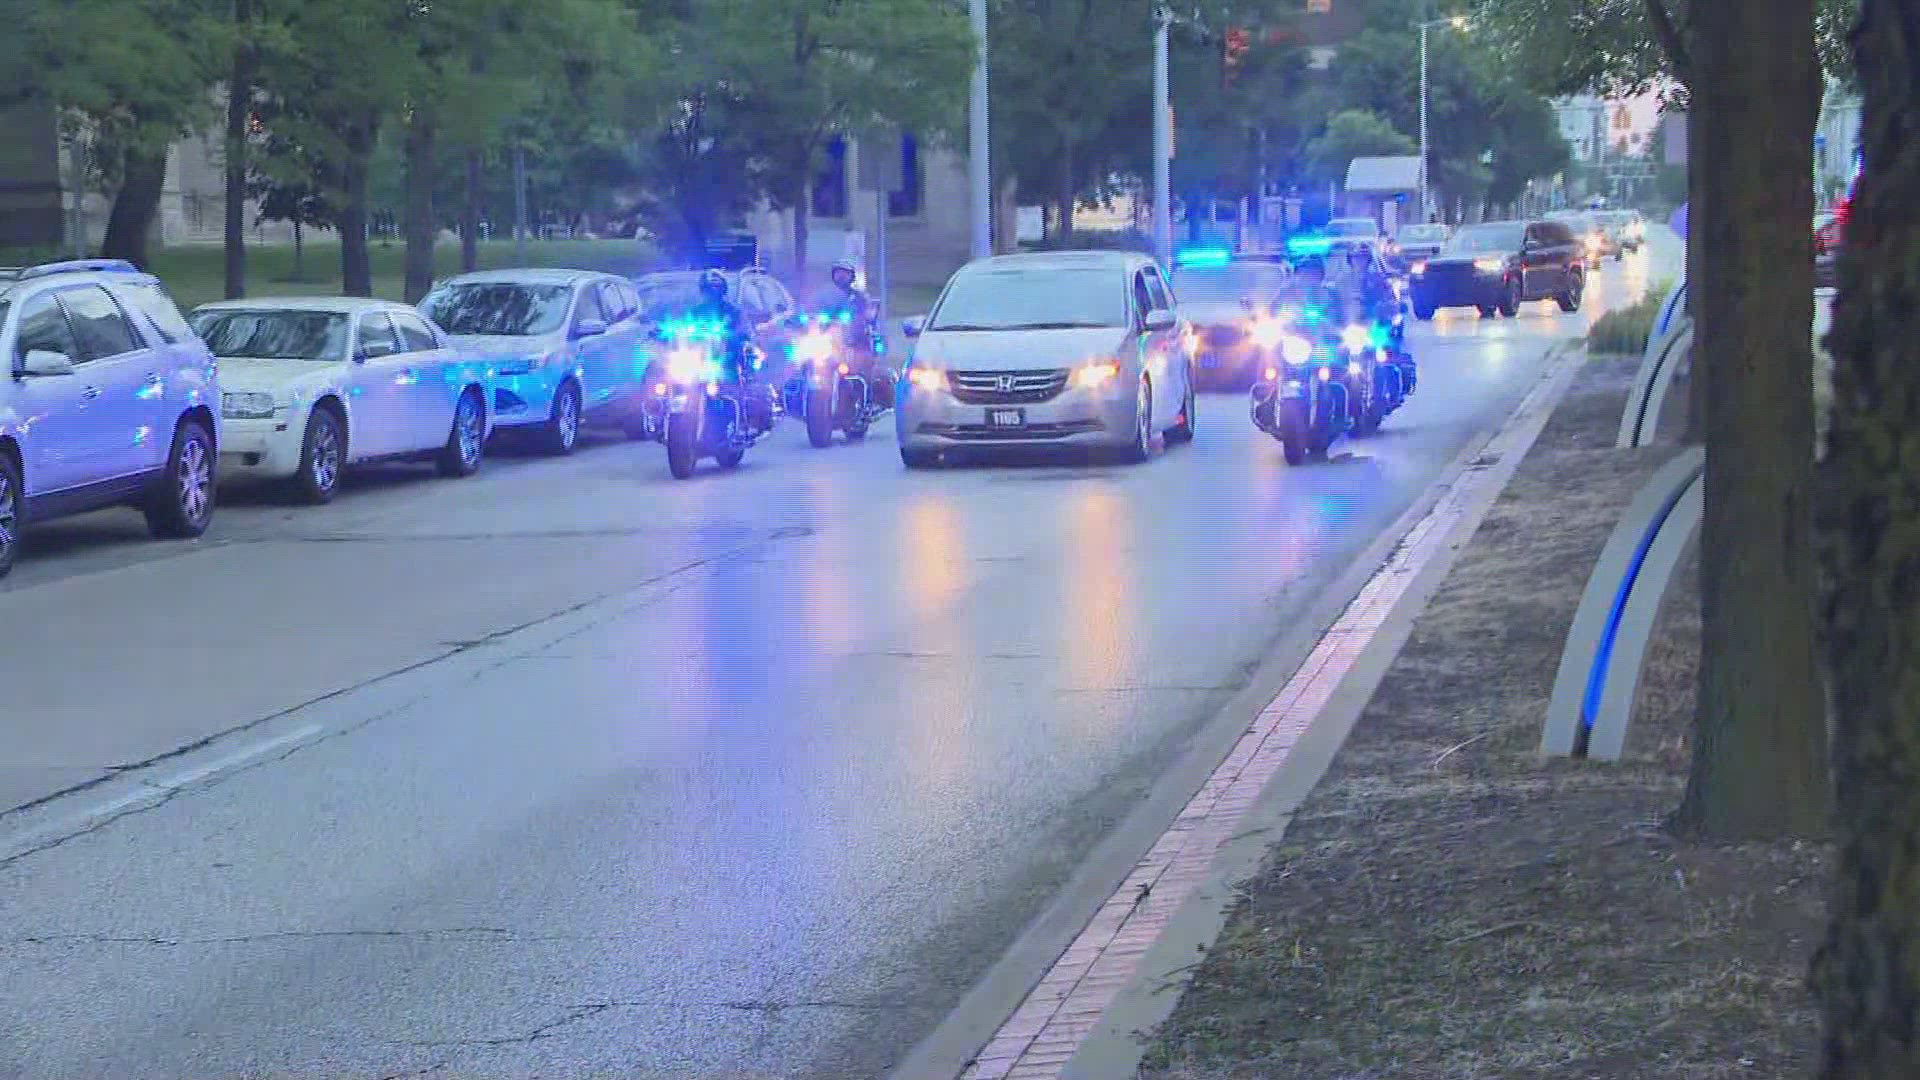 The body of a Cleveland police officer shot and killed in the line of duty was given an escort from the hospital.